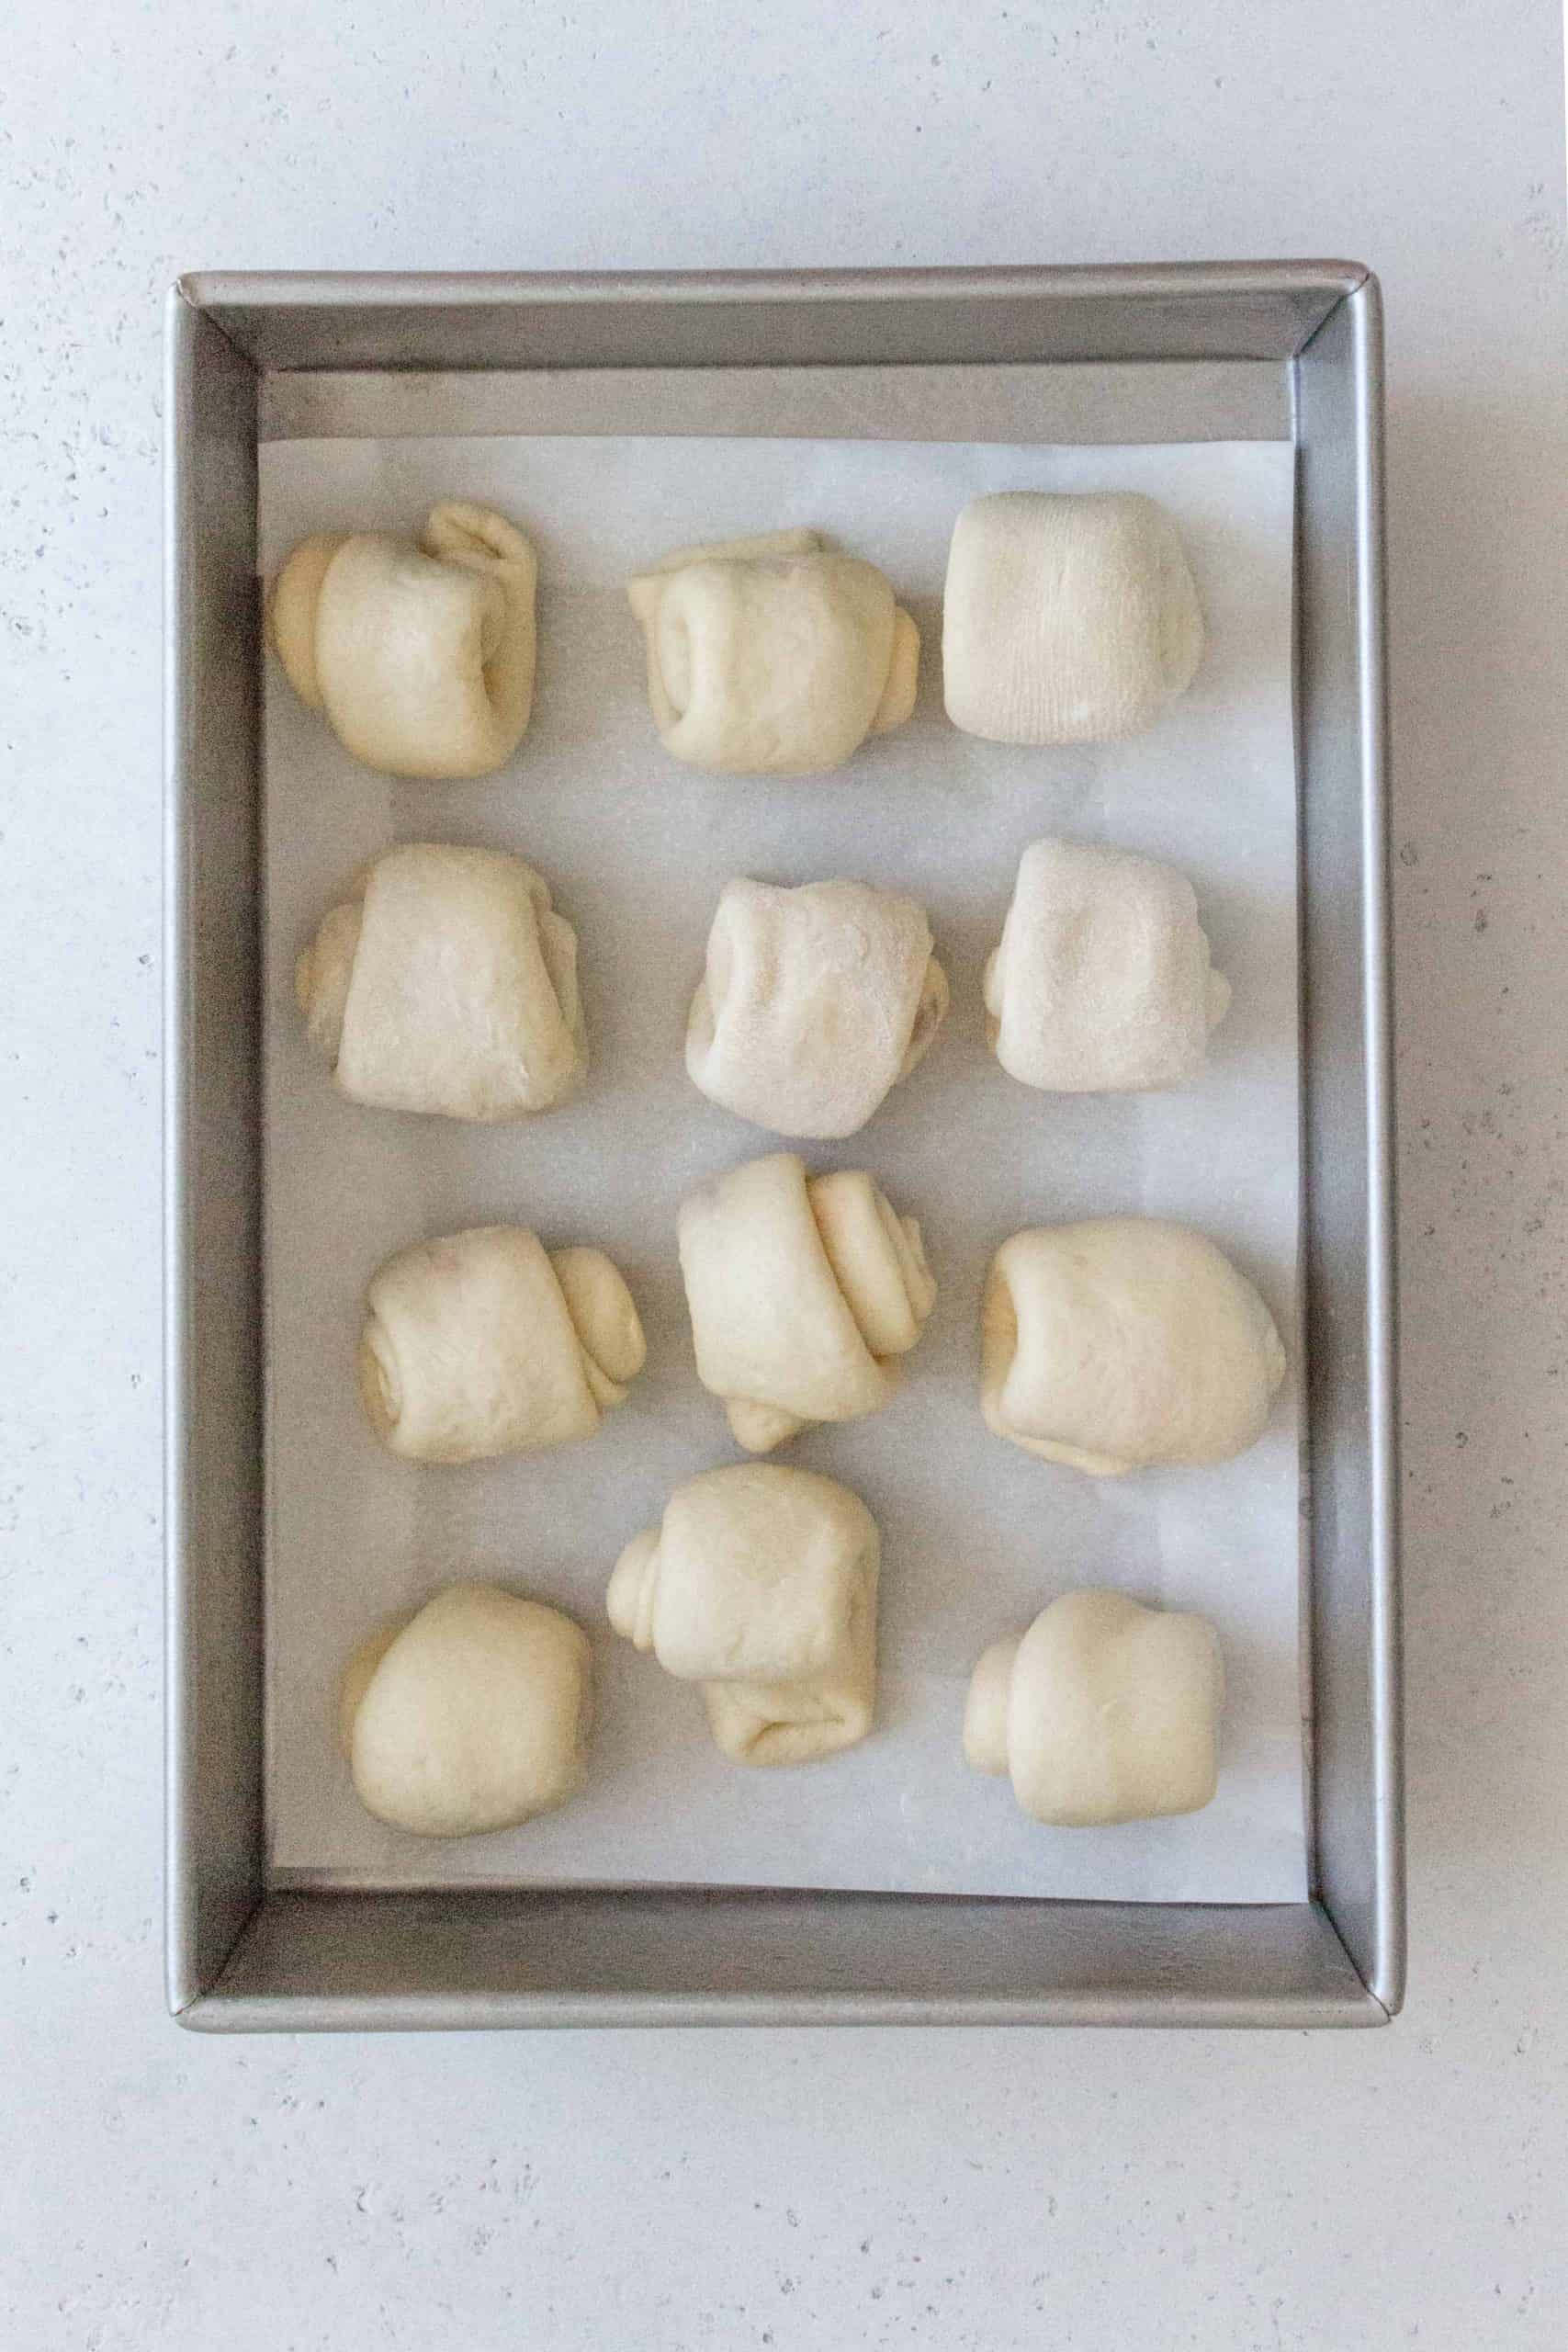 Place all the strawberry jam filled dinner rolls into a greased pan or parchment lined pan and proof again for 30-40 minutes.